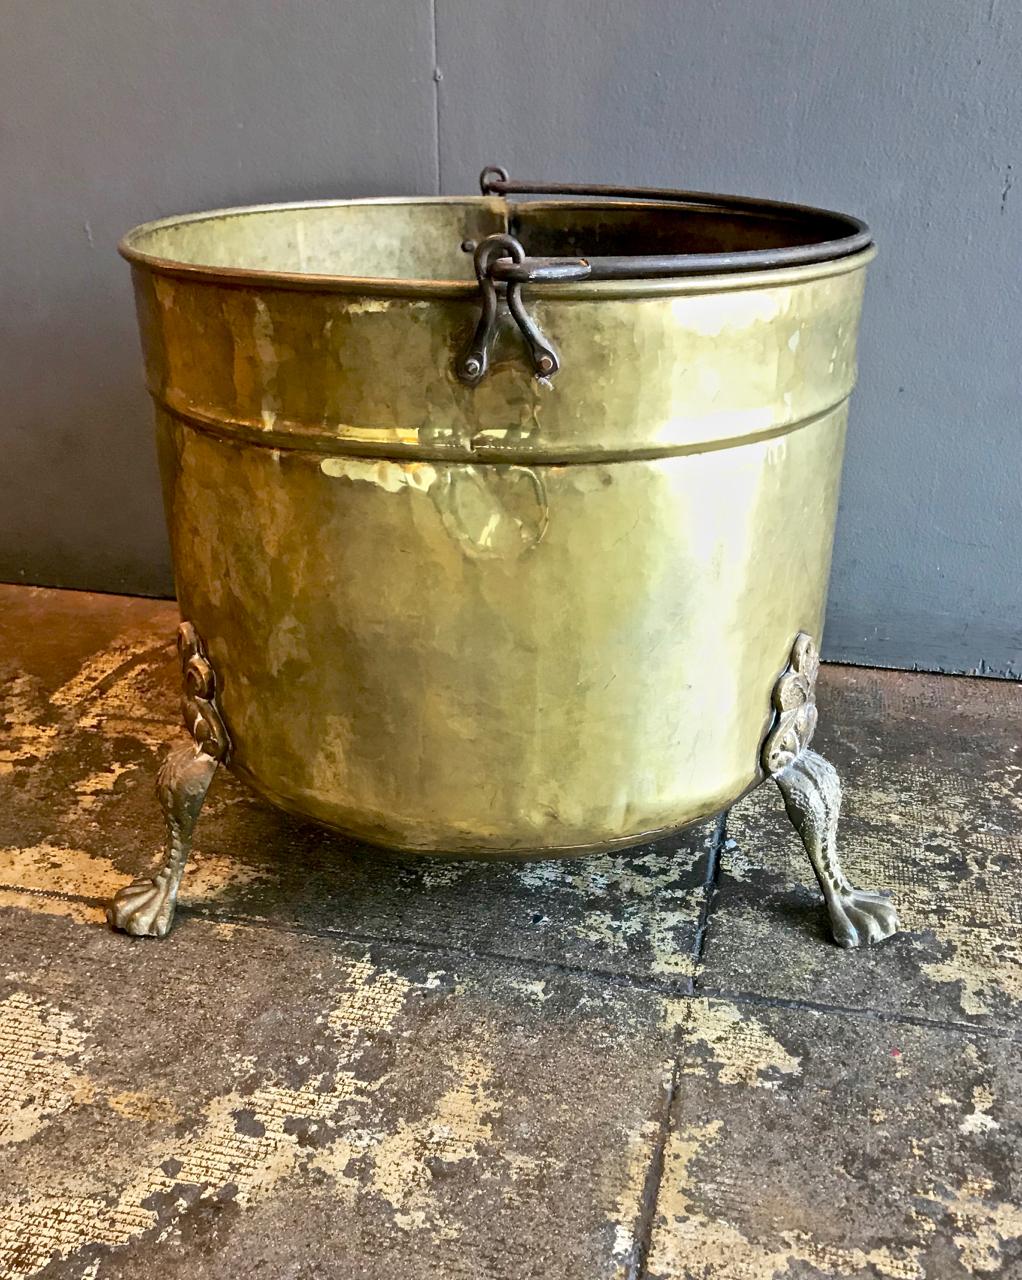 This is large decorative 19th century English or Dutch log bin. The log bin has a rolled rim, swing handle and is raised on cast lion paw feet. The bin would also make a great planter or towel holder.